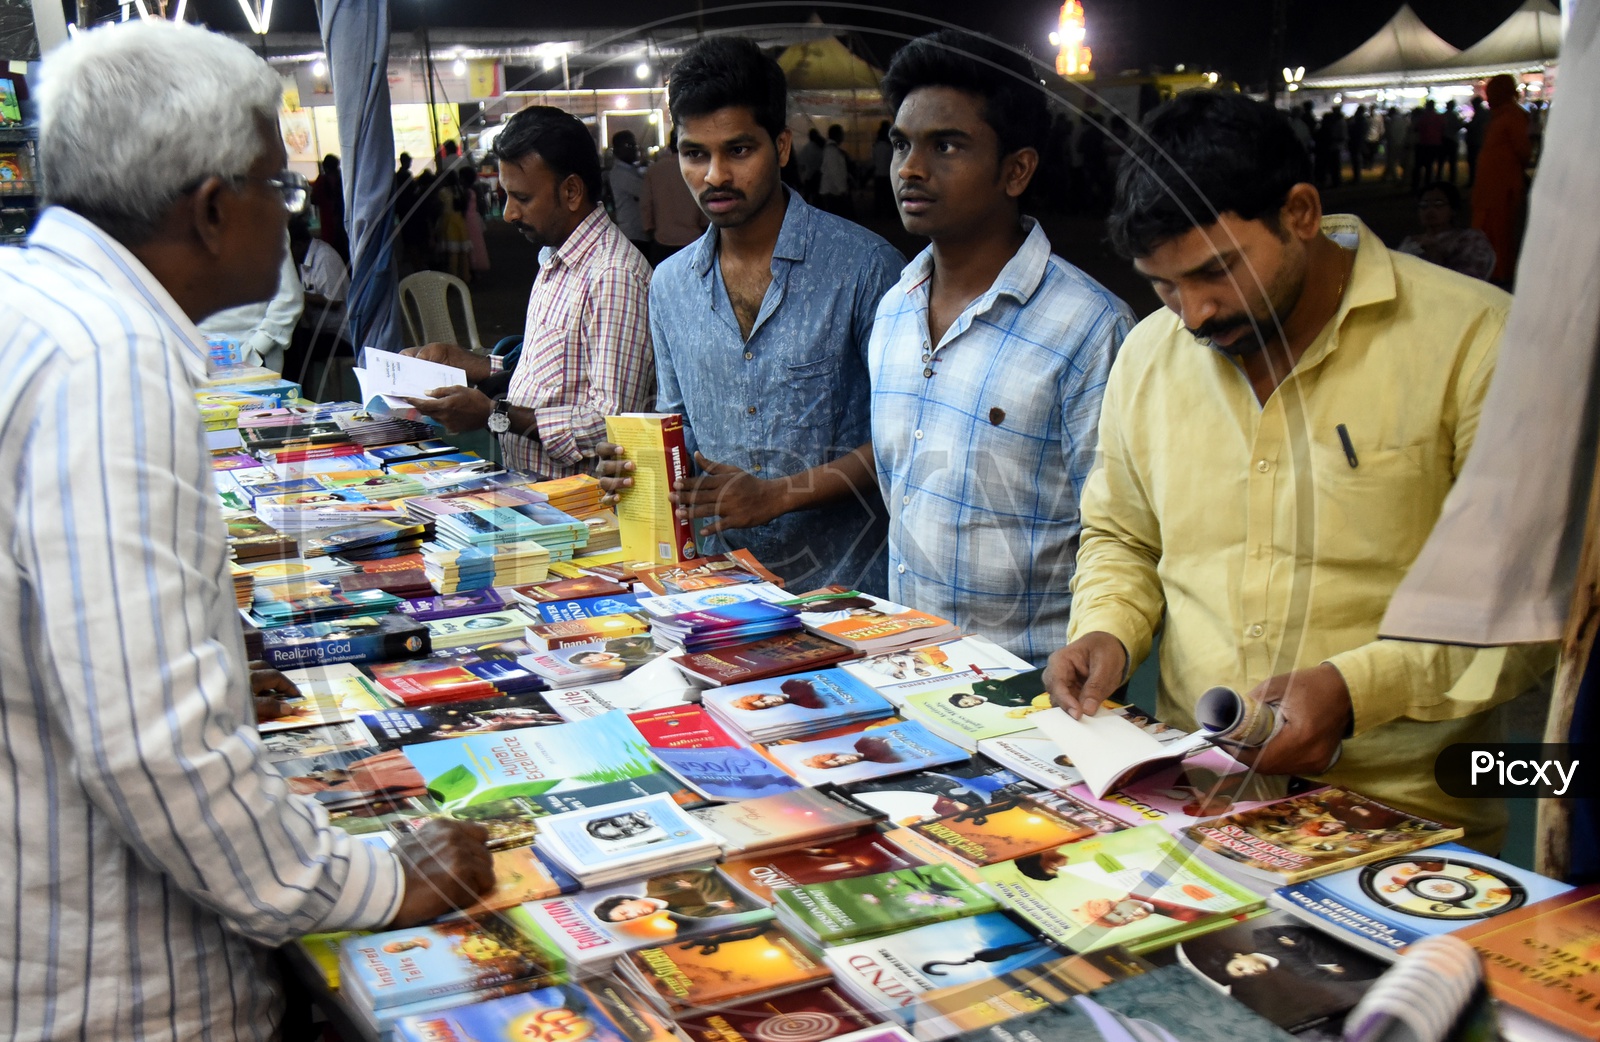 Men buying books at the stall